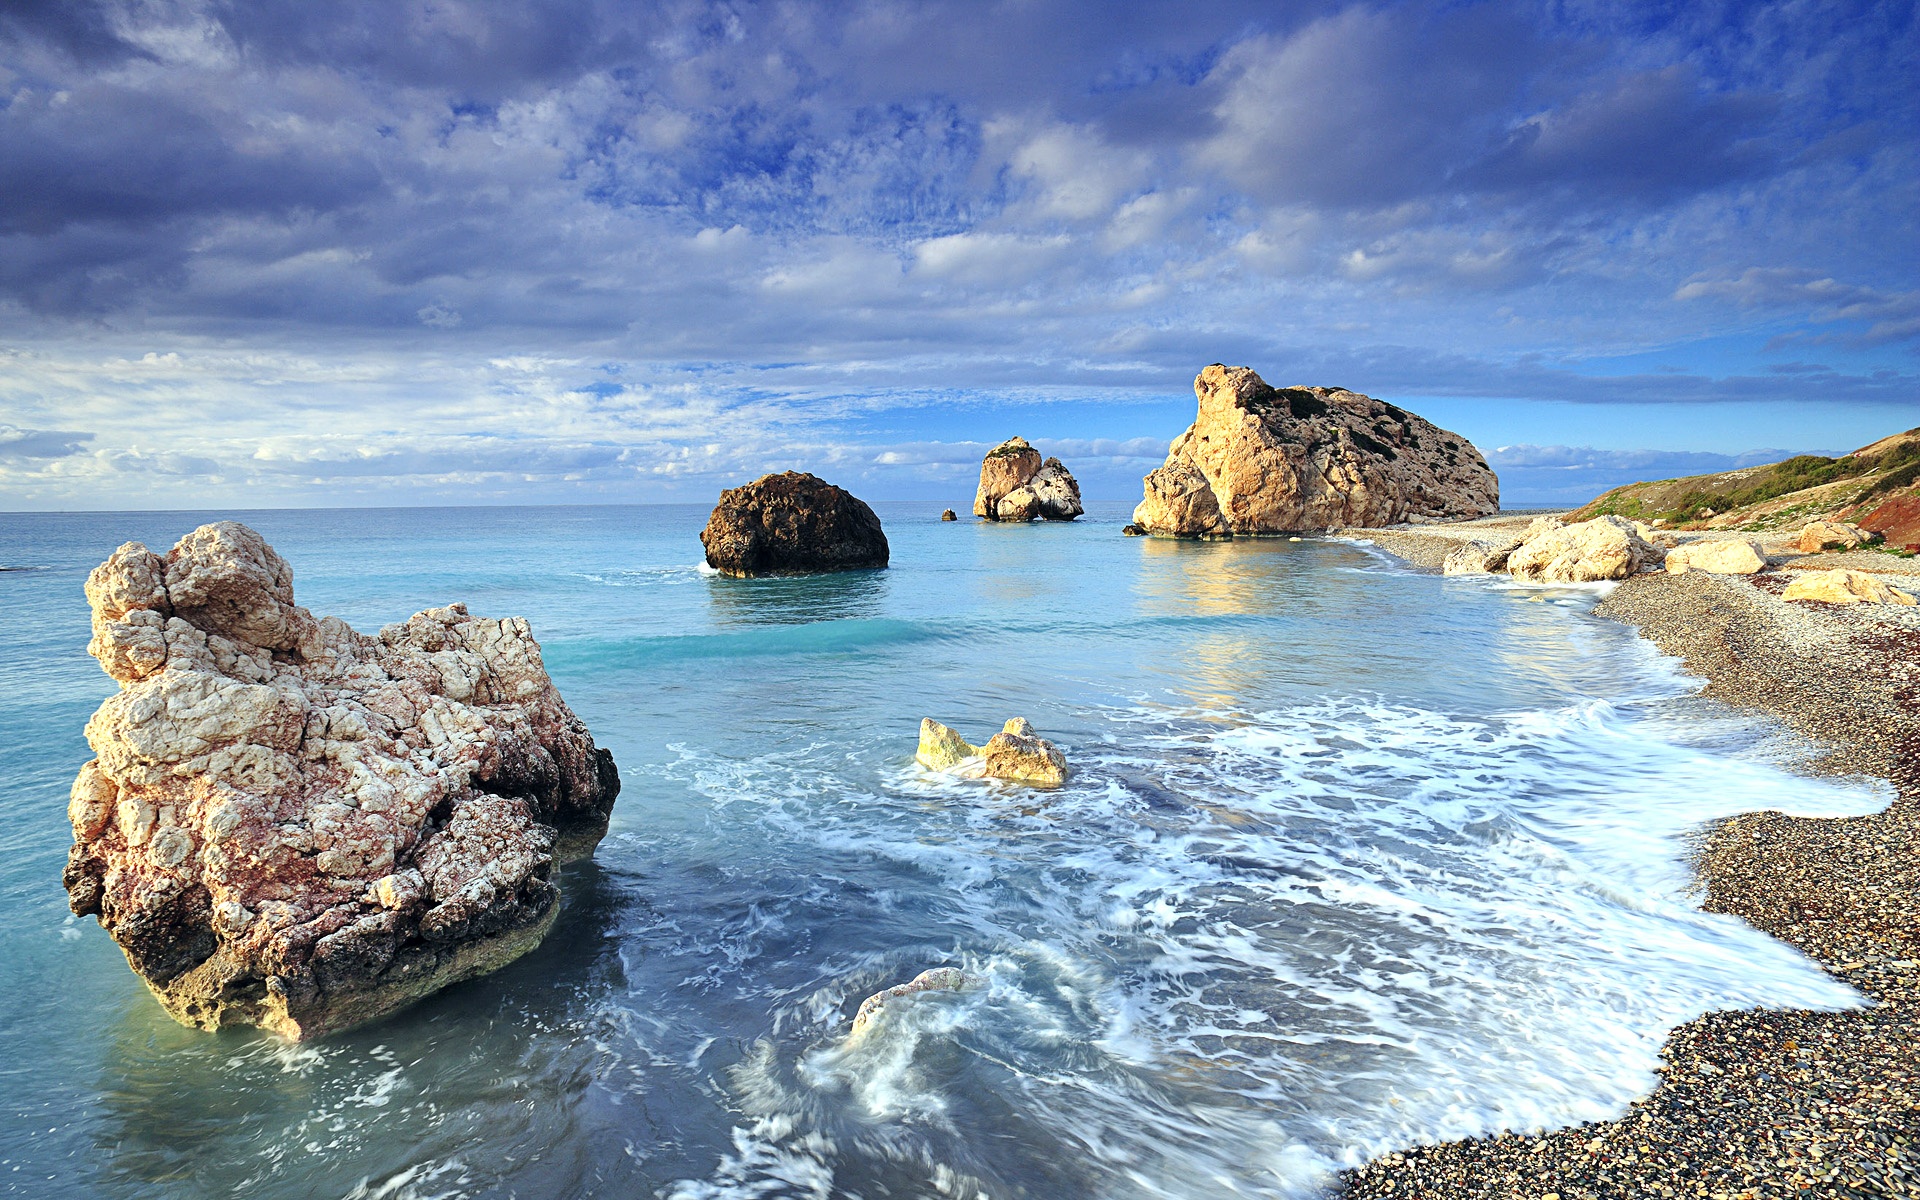 Cyprus Rock Sea Shores Wallpapers in jpg format for free